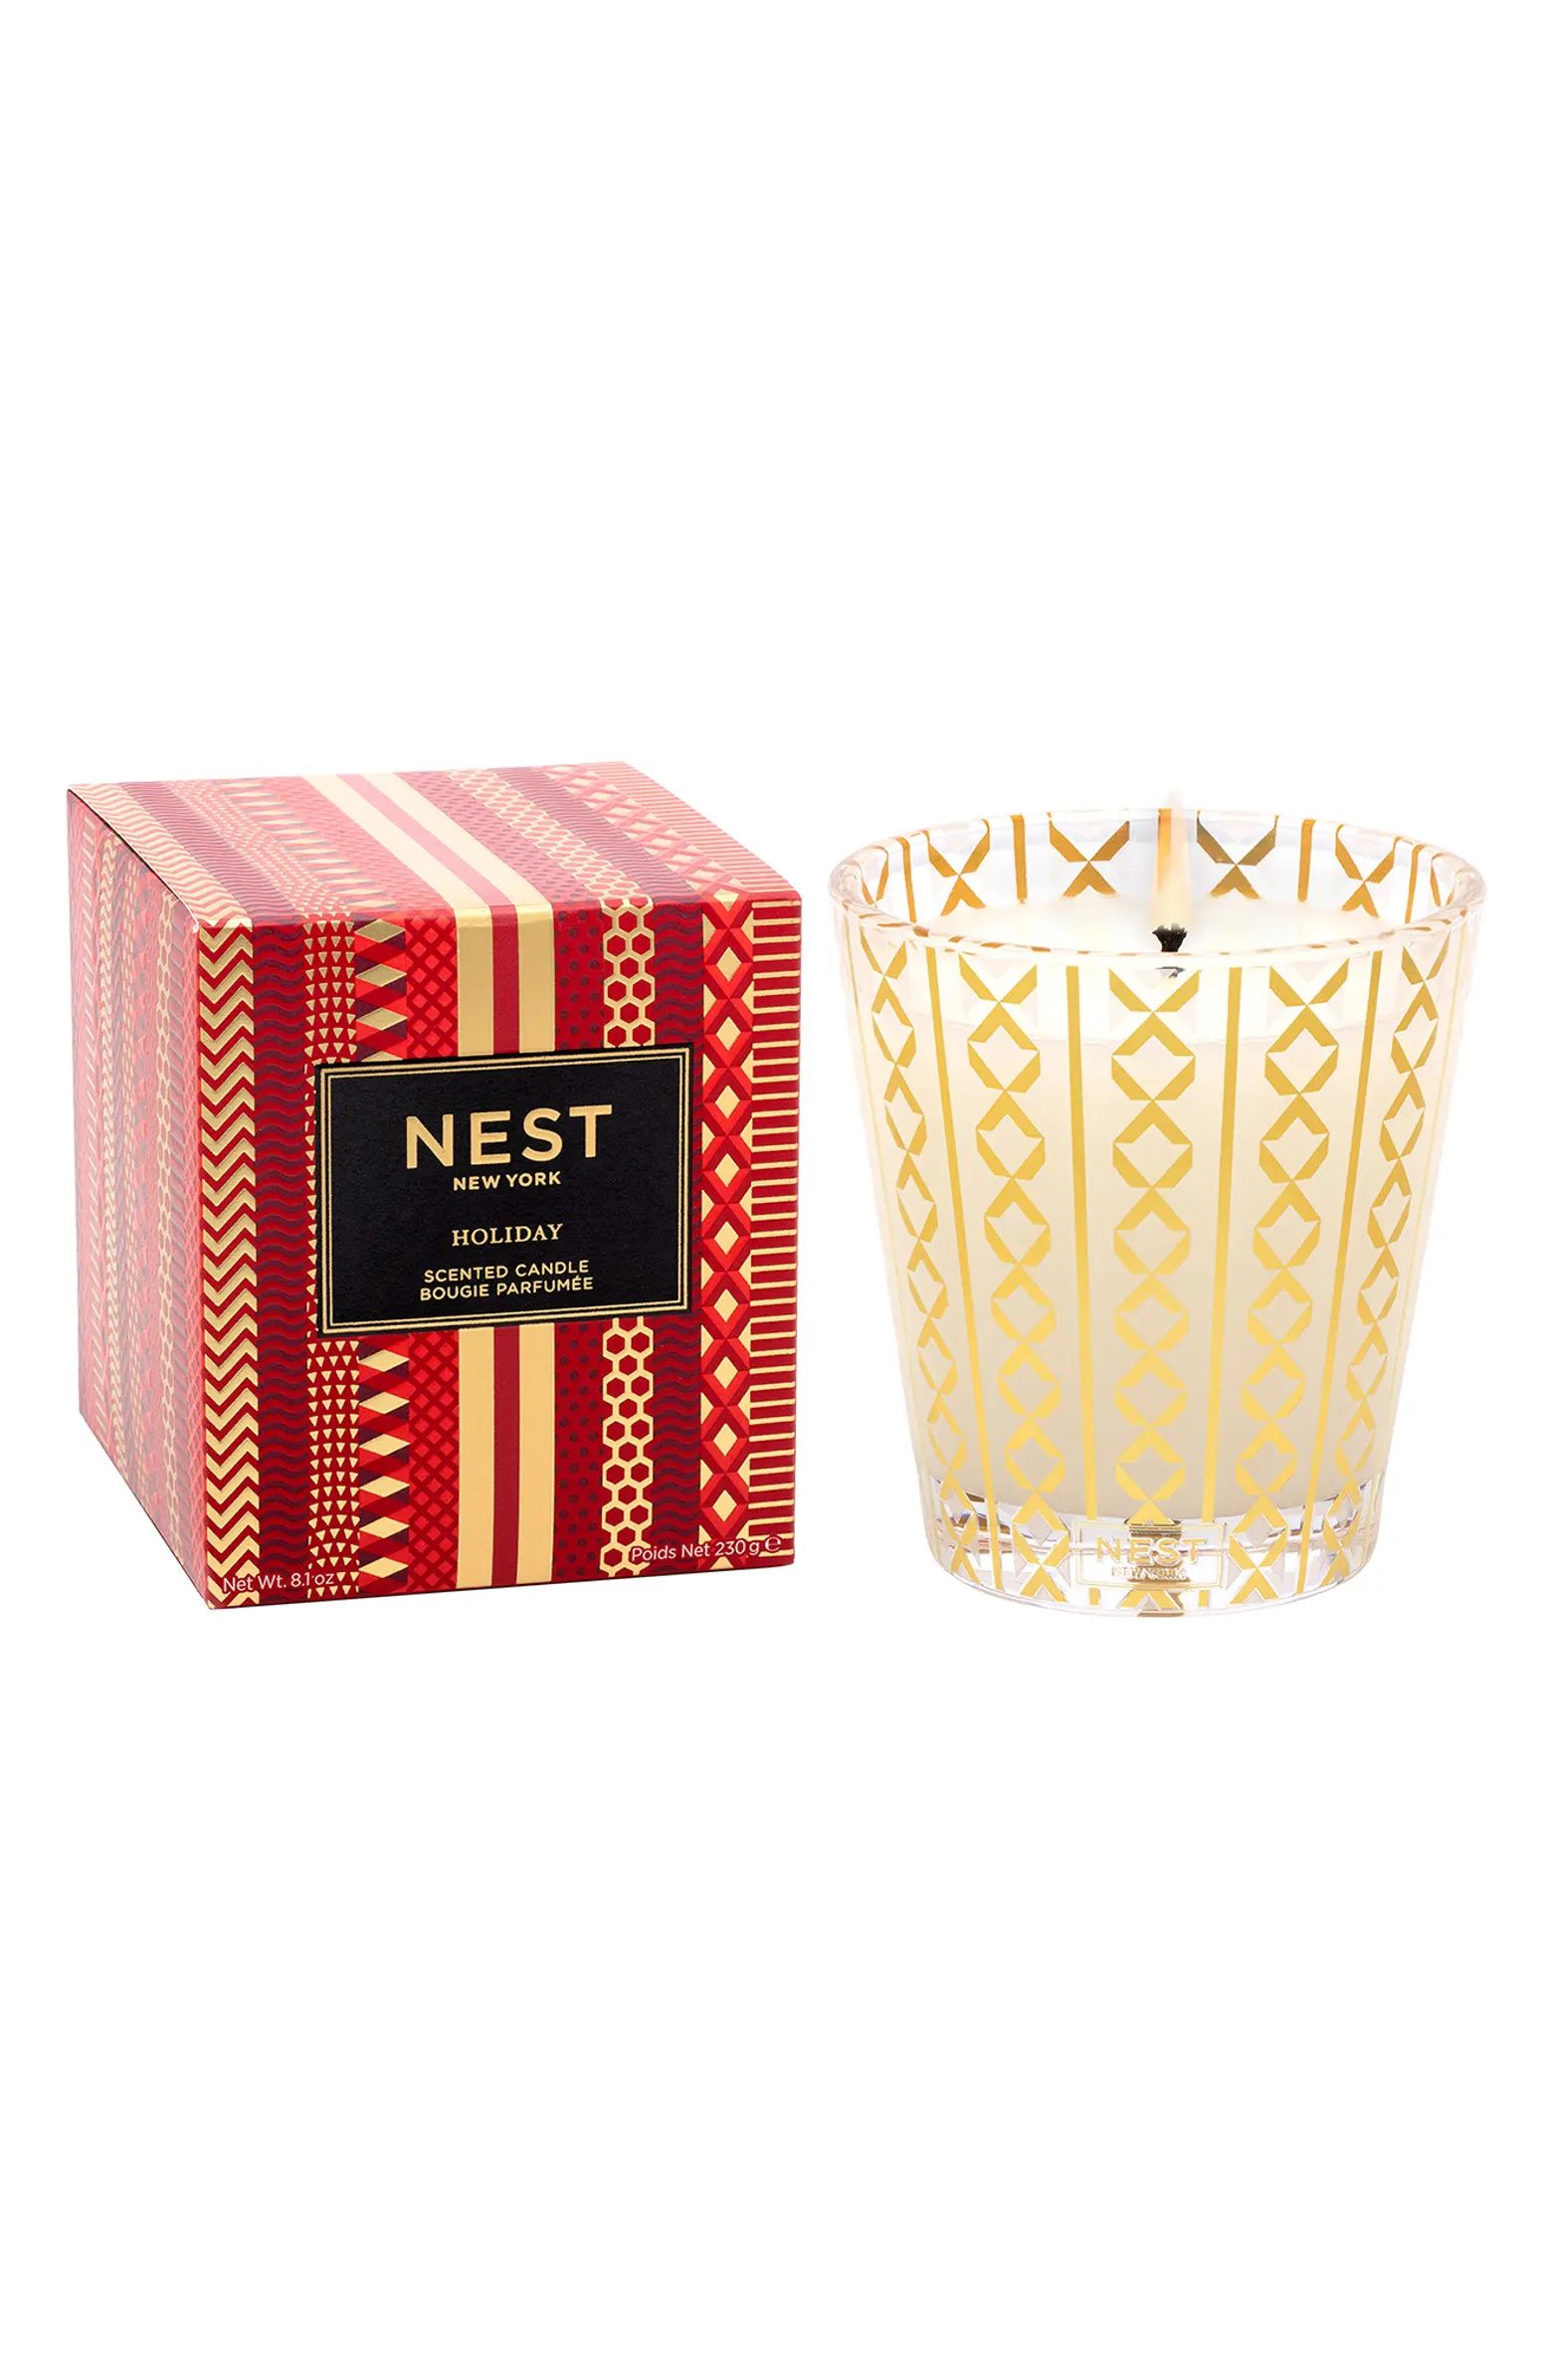 NEST New York Holiday Candle | Nordstrom | Nordstrom